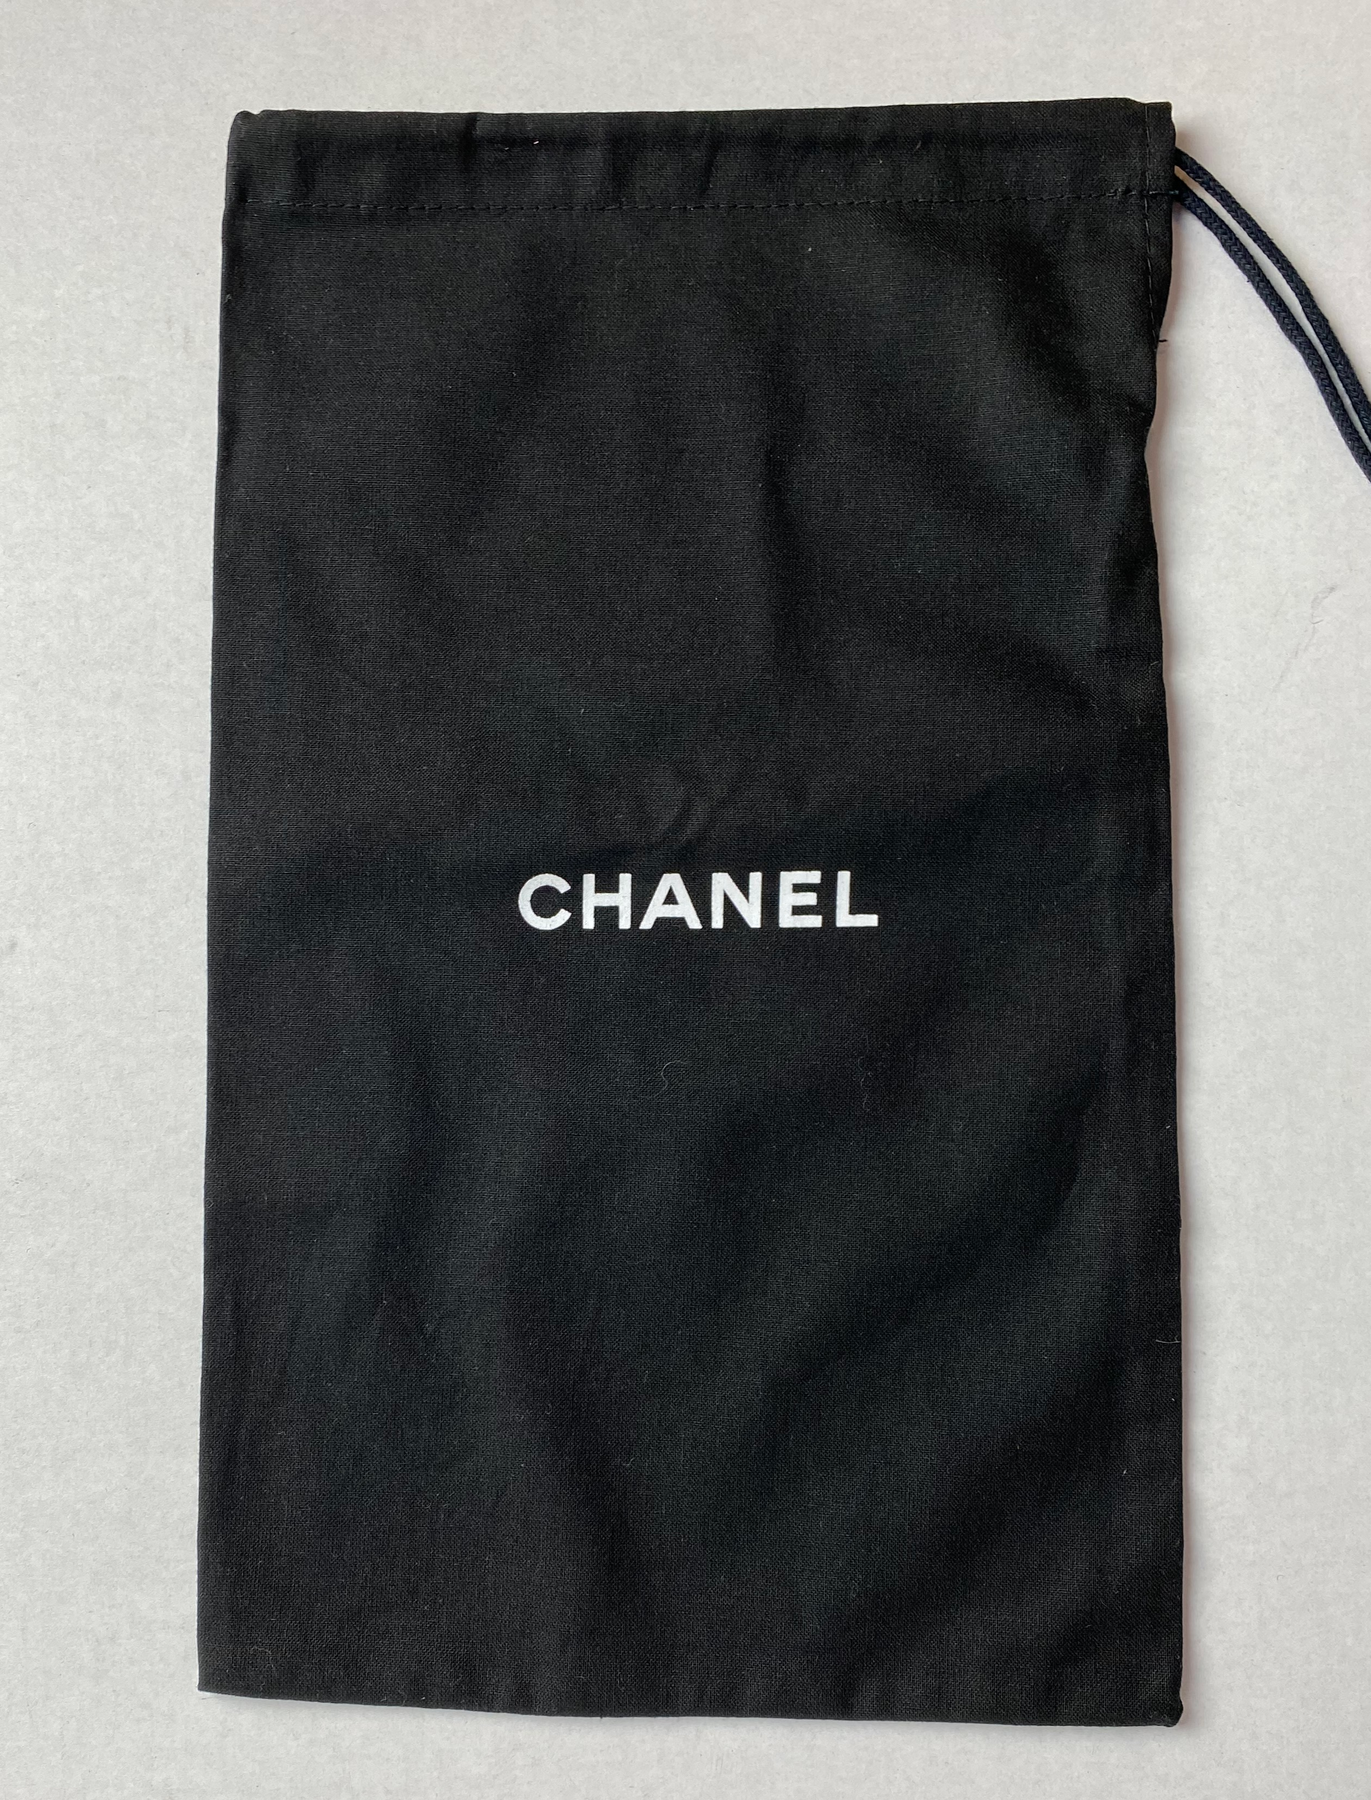 100% Auth Chanel Set of Two Black Shoe/ Small Bag/ Wallet Dust Bags 13x  7.75